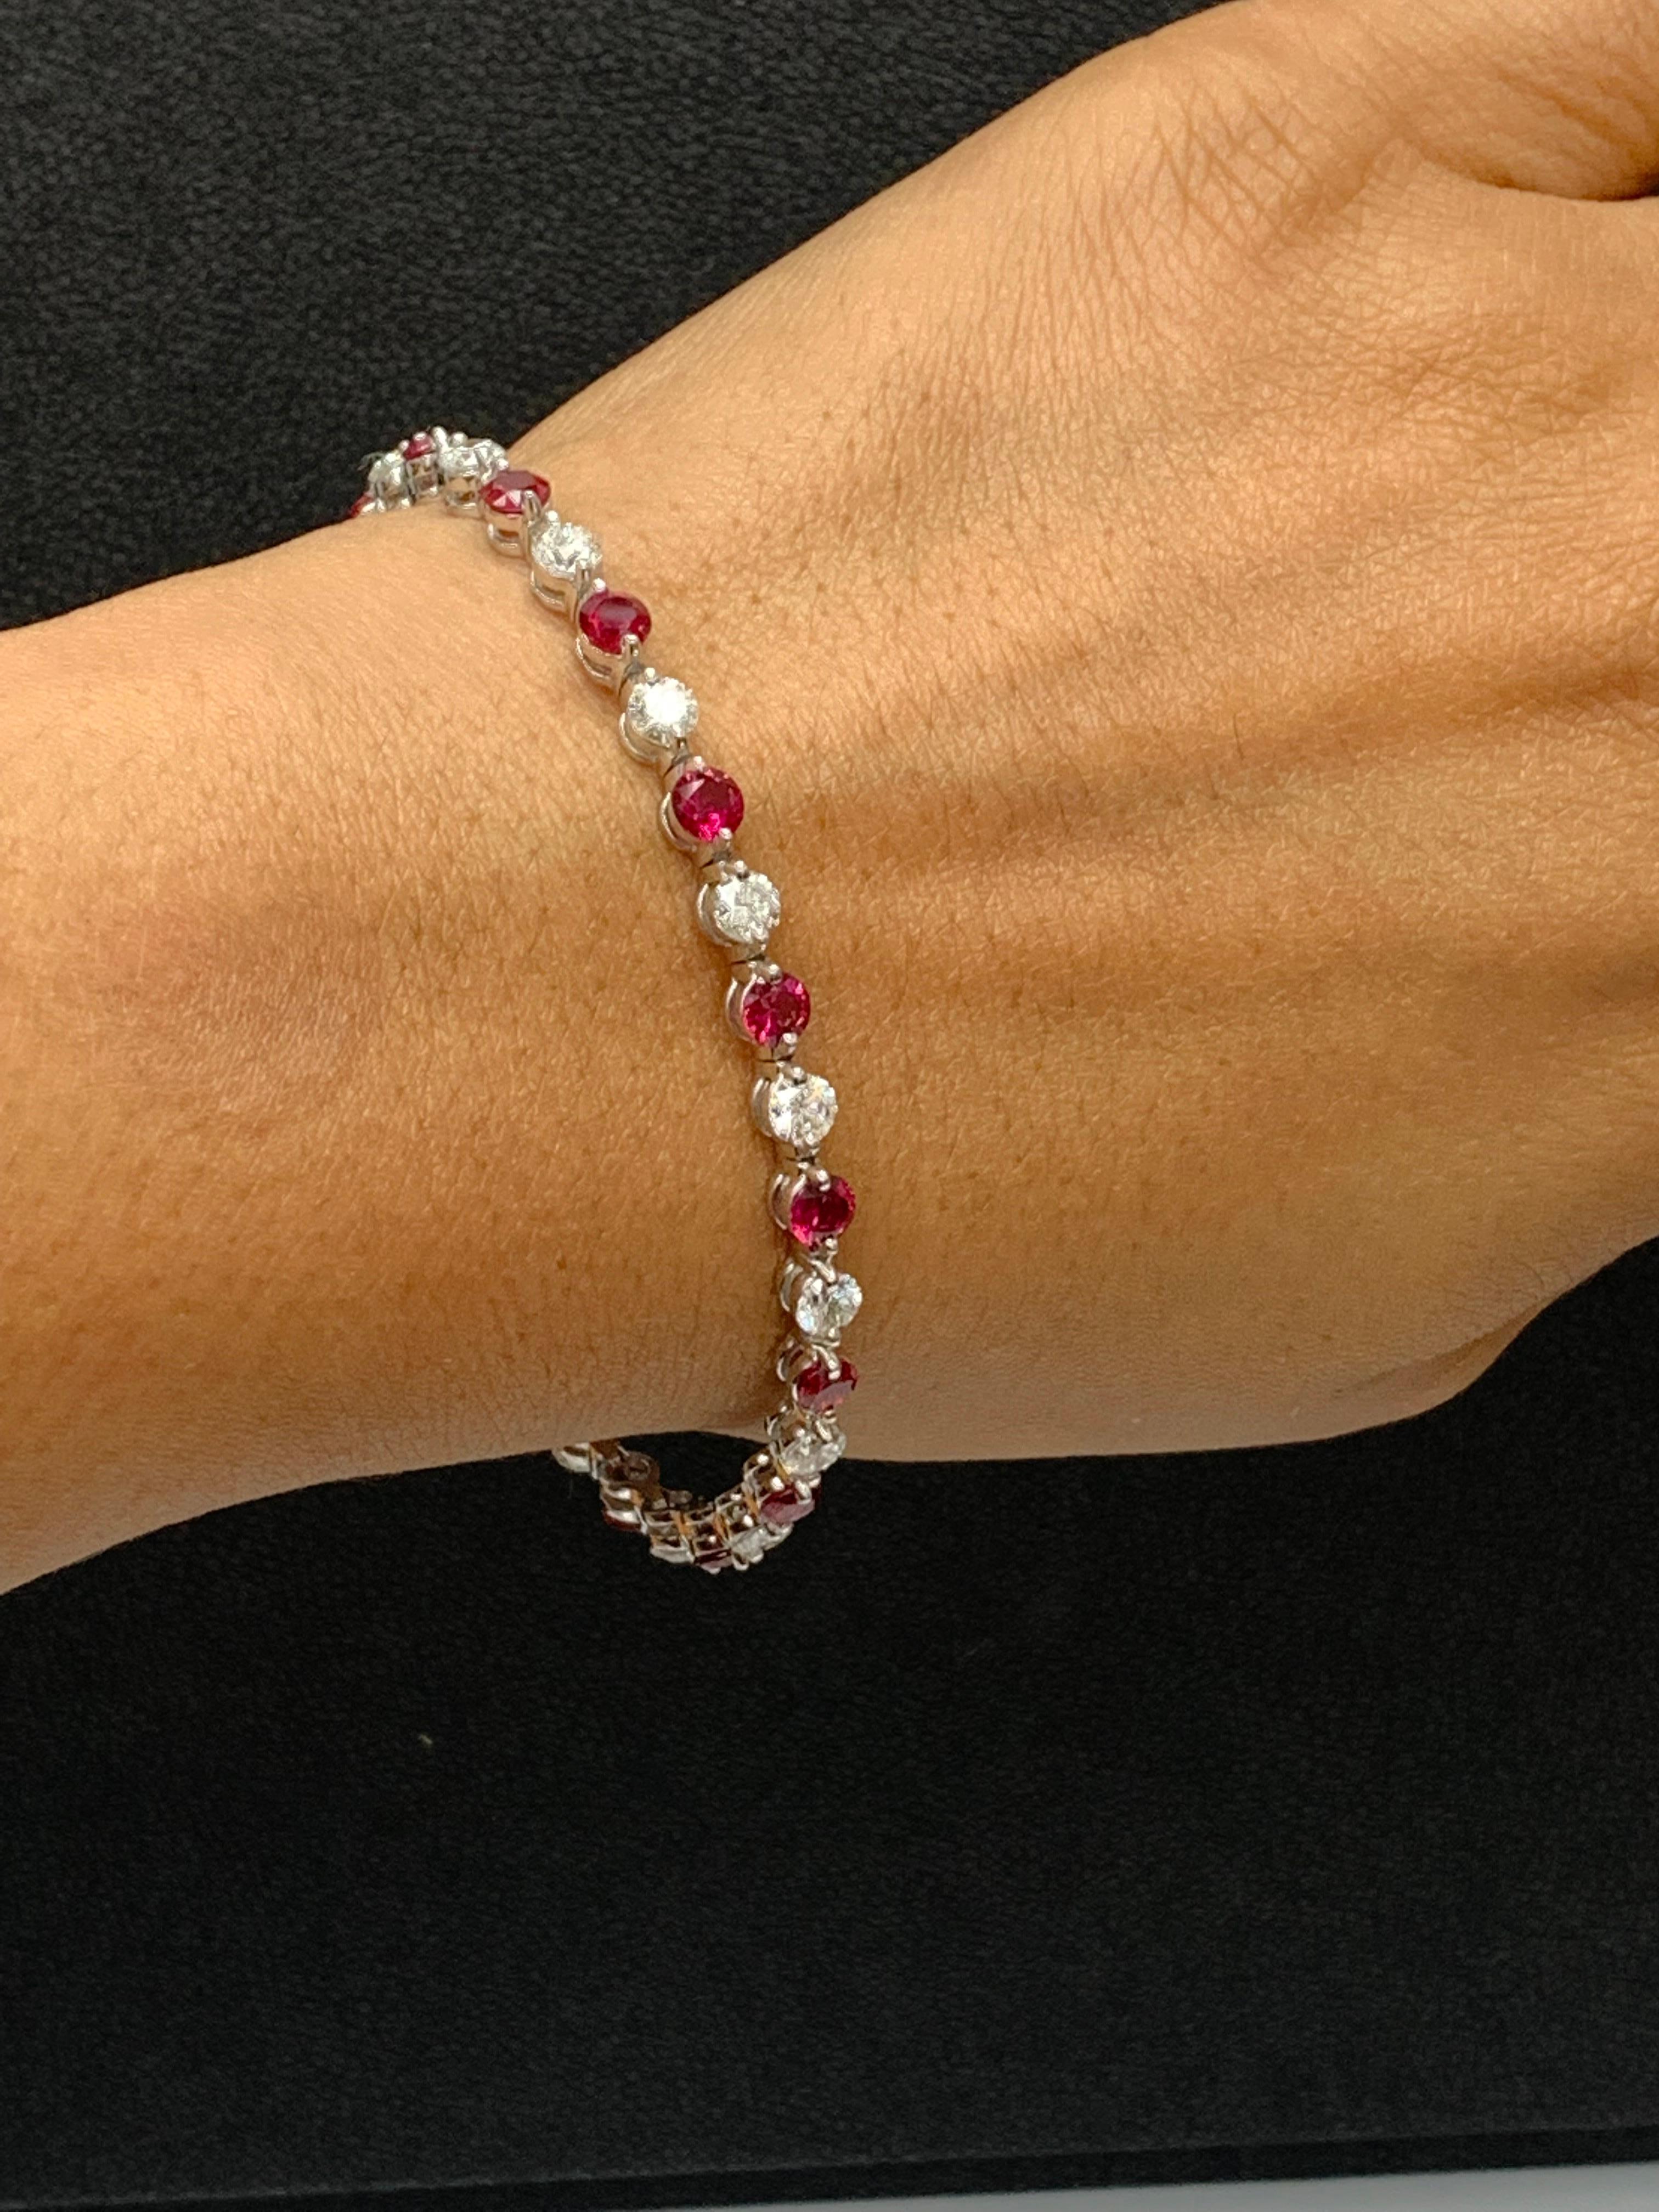 4.55 Carat Round Ruby and Diamond Bracelet in 14k White Gold For Sale 6